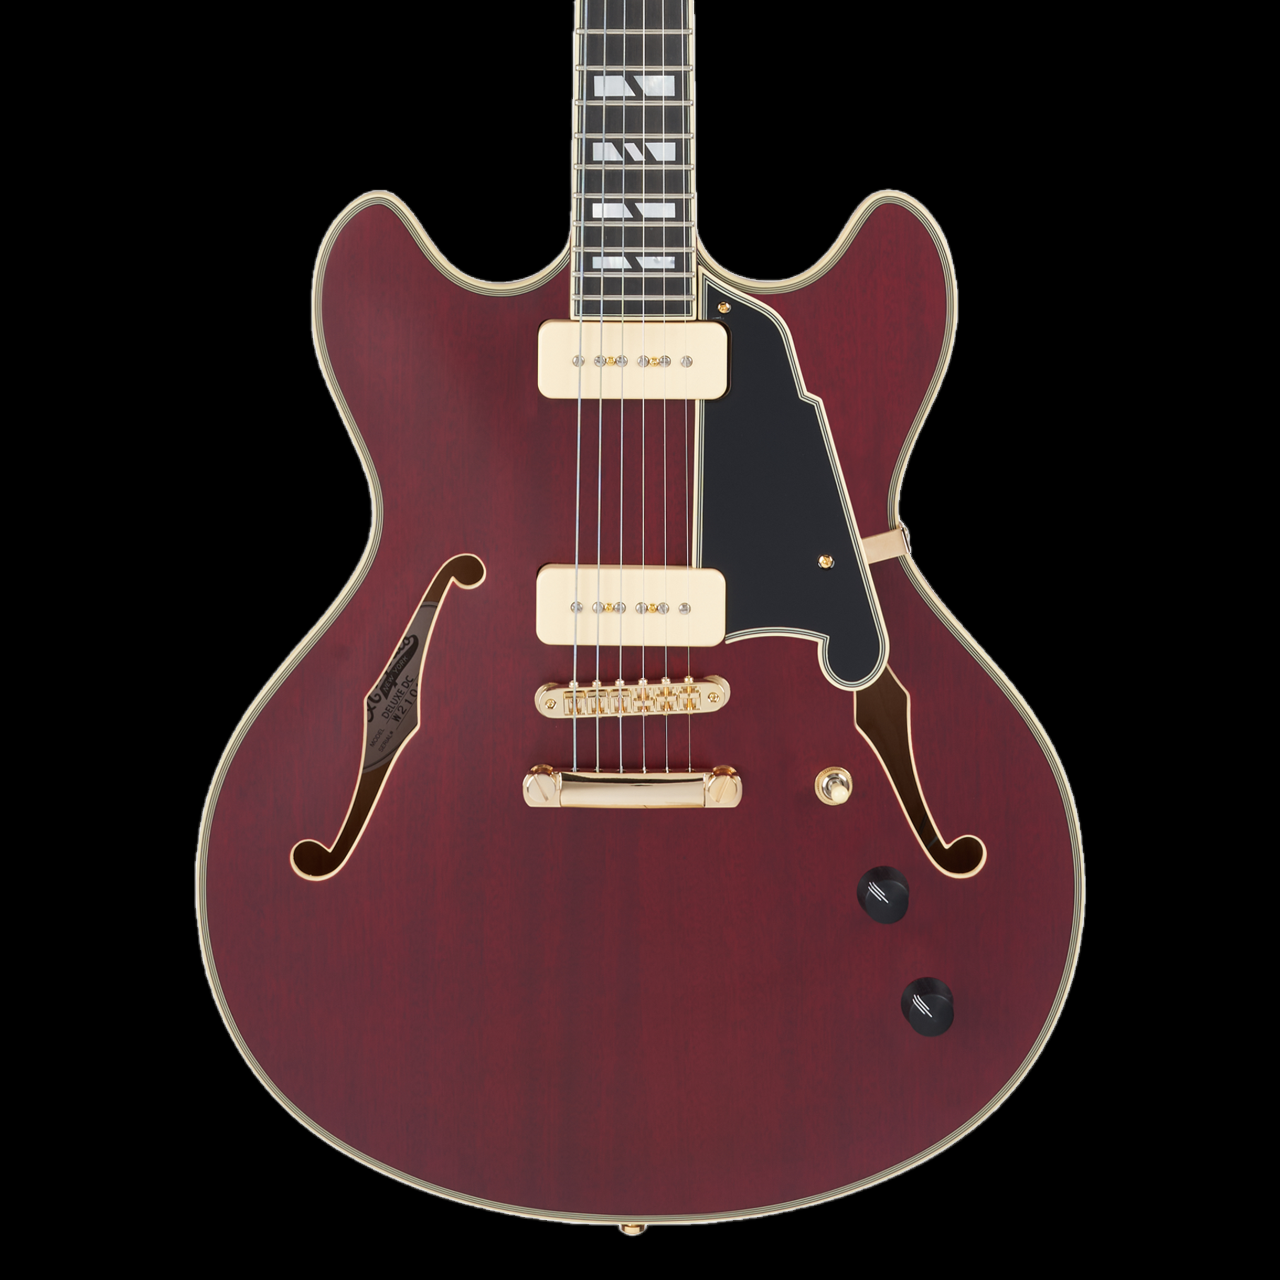 D'Angelico Deluxe DC Satin Trans Wine Electric Guitar